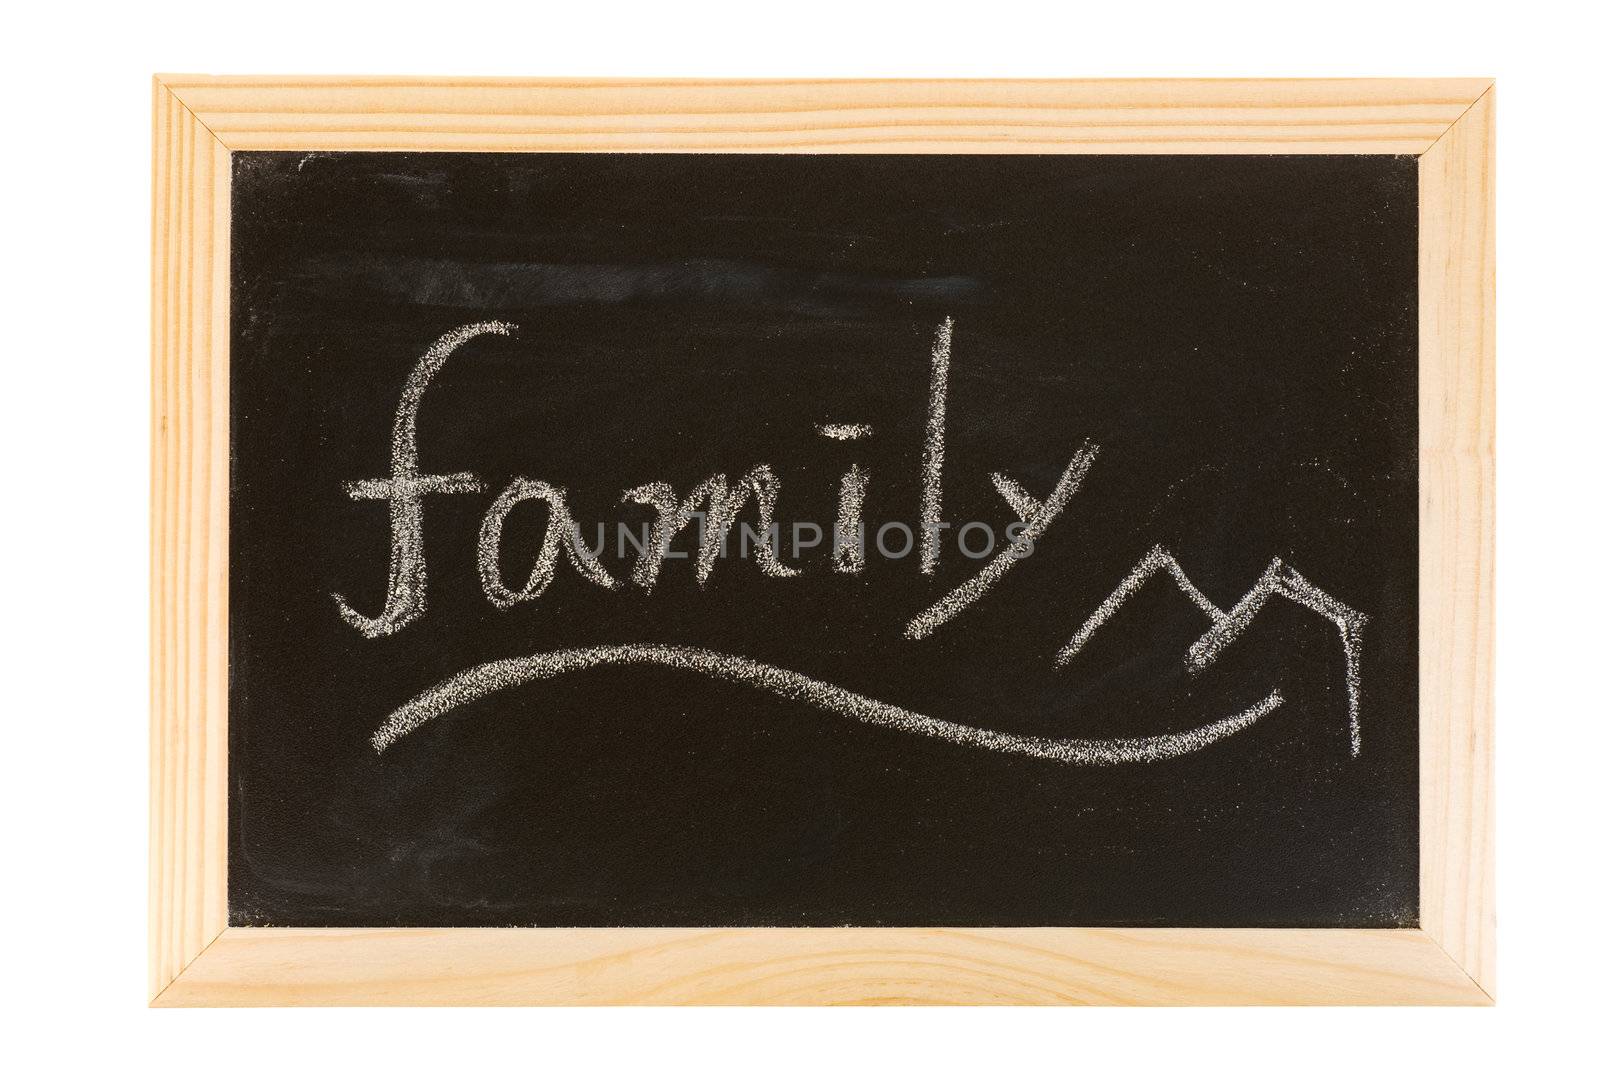 Family word in English with simple image on the blackboard.